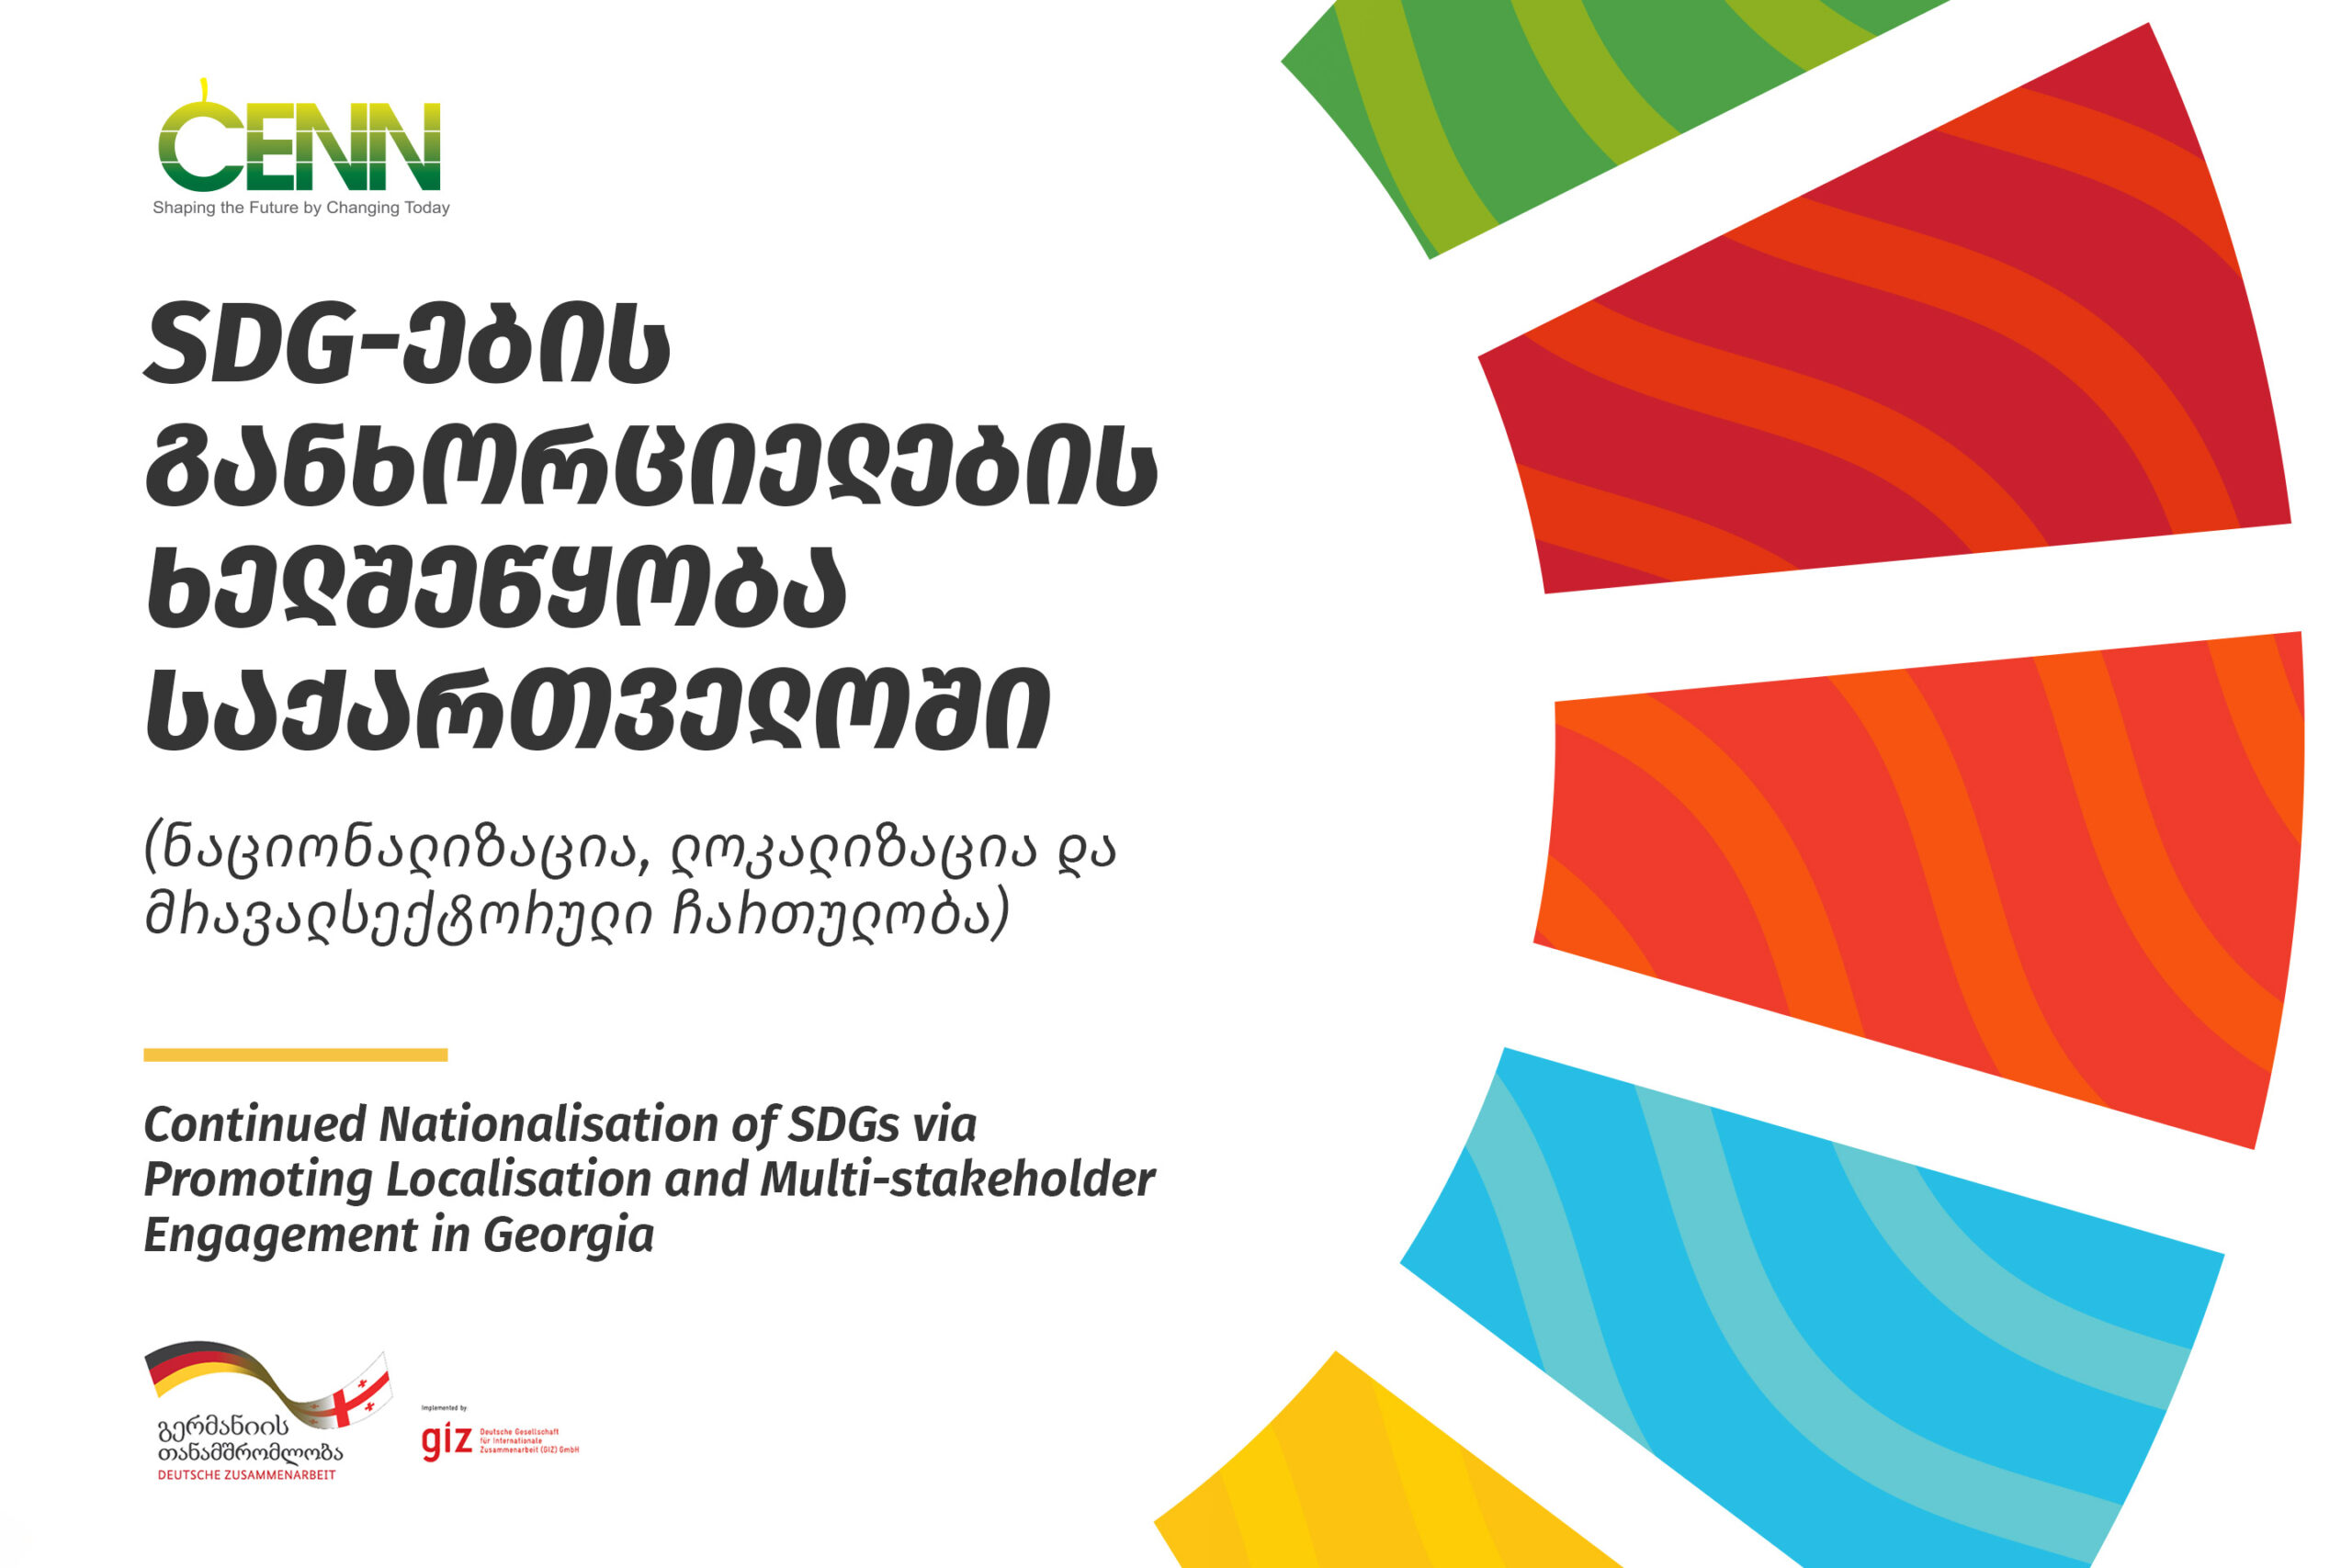 CENN, with the financial support of the German Government, launched a new project to support the implementation of SDGs in Georgia